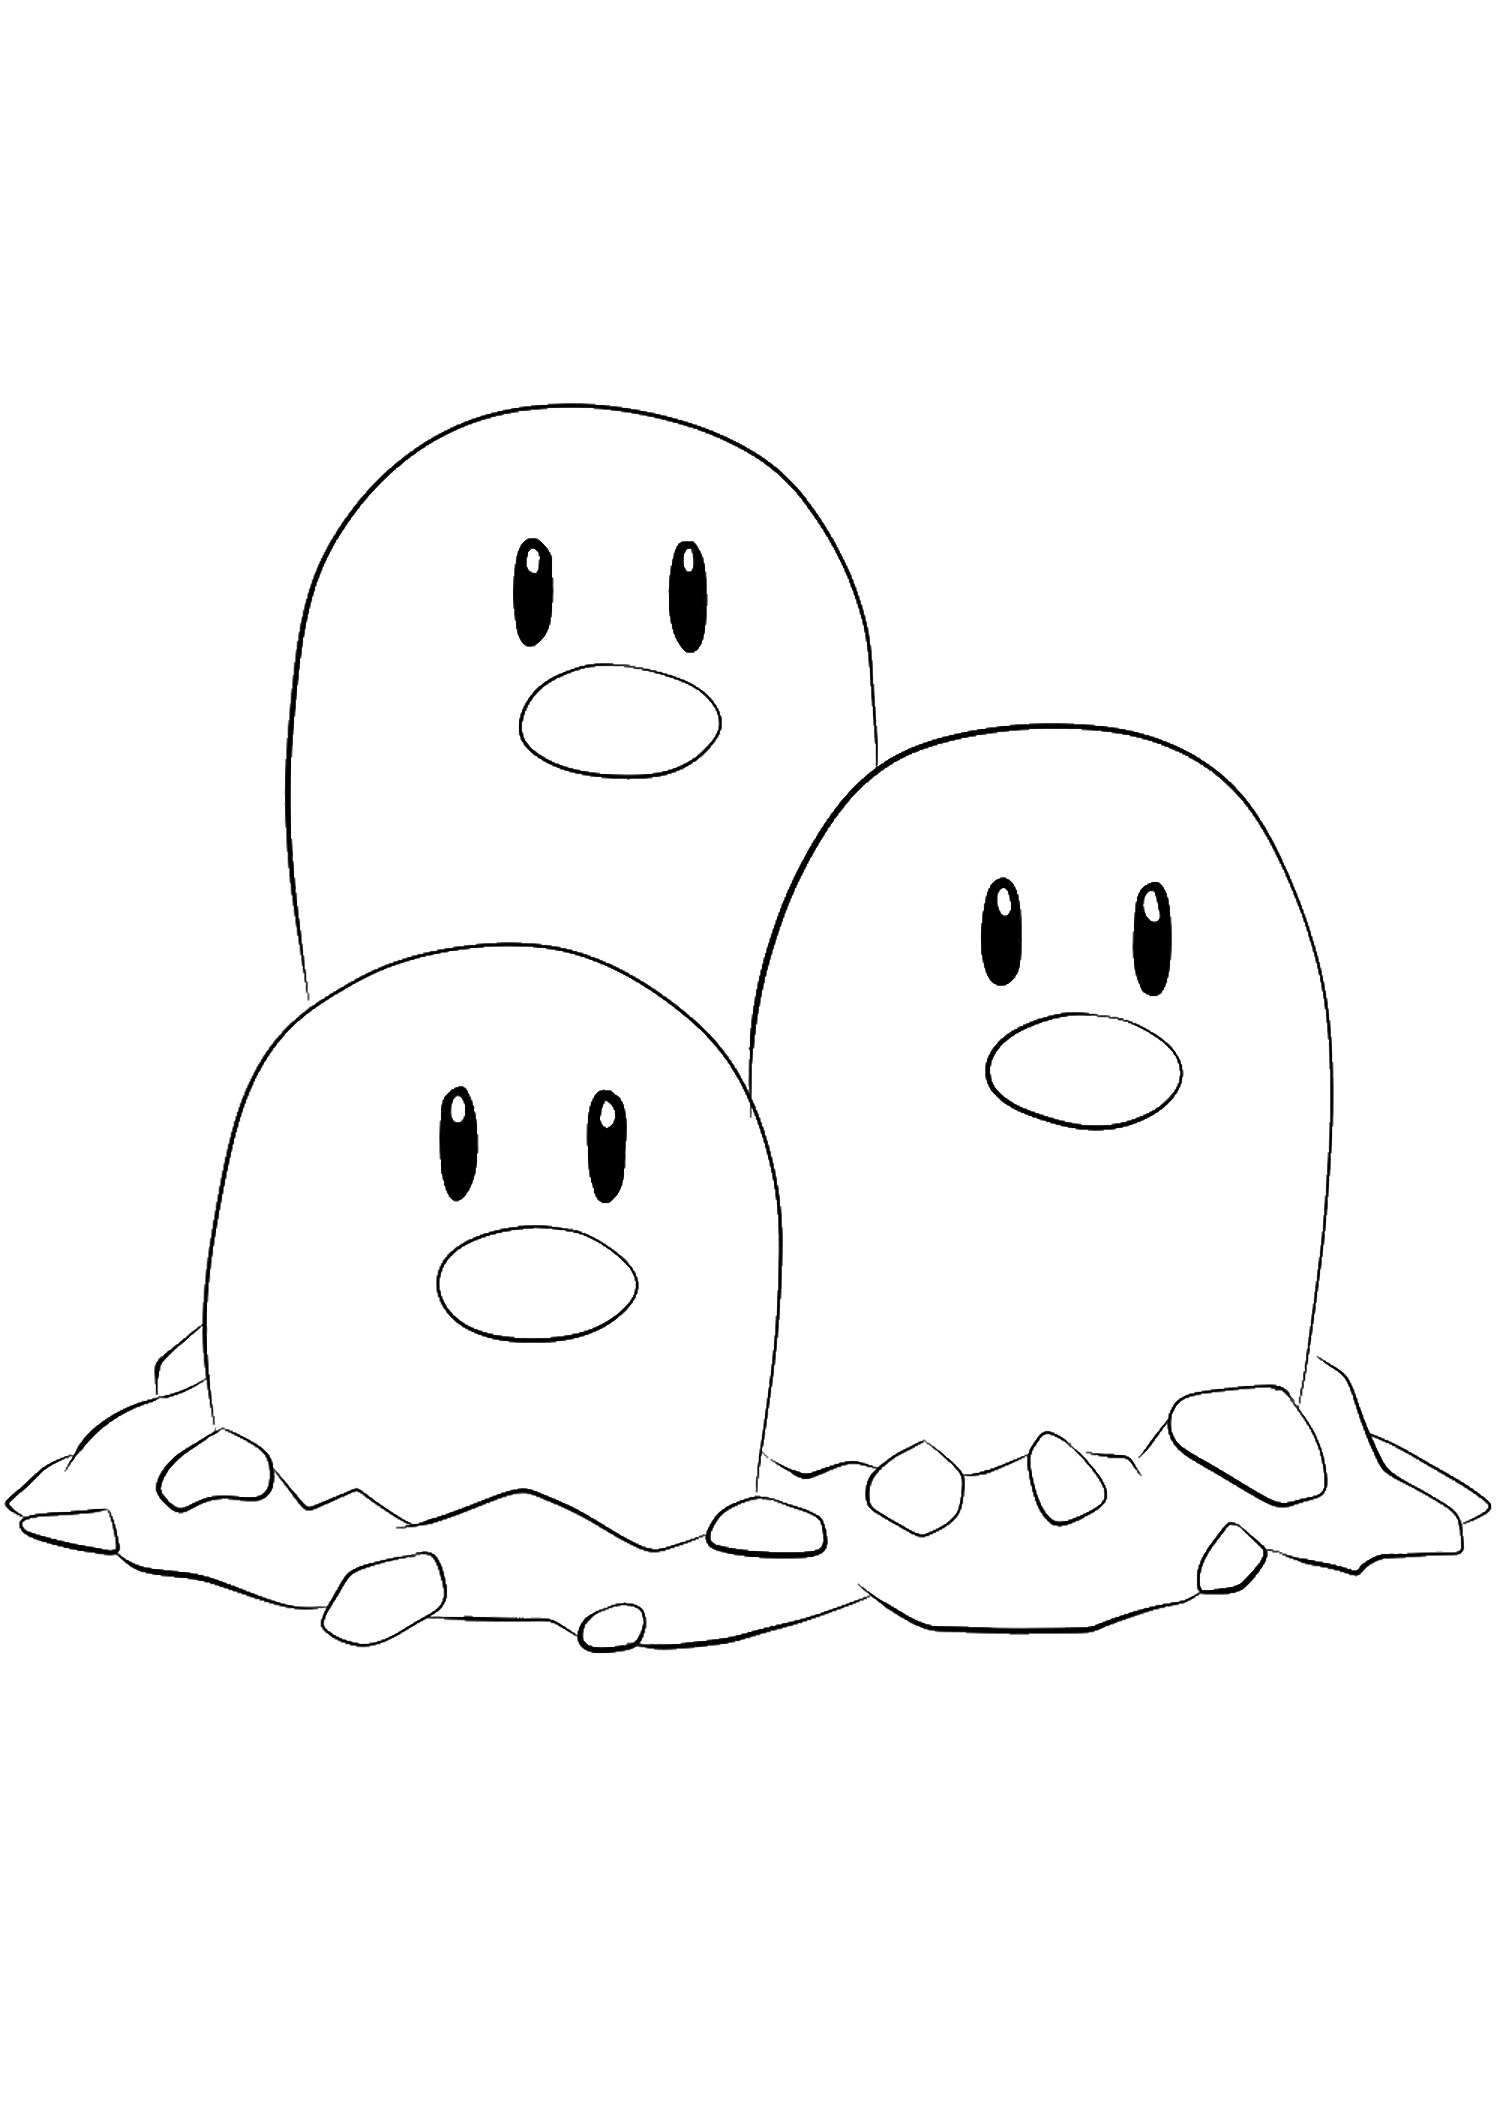 Pokemon Coloring Page Dugtrio No51 Pokemon Generation I All Pokemon Coloring Pages